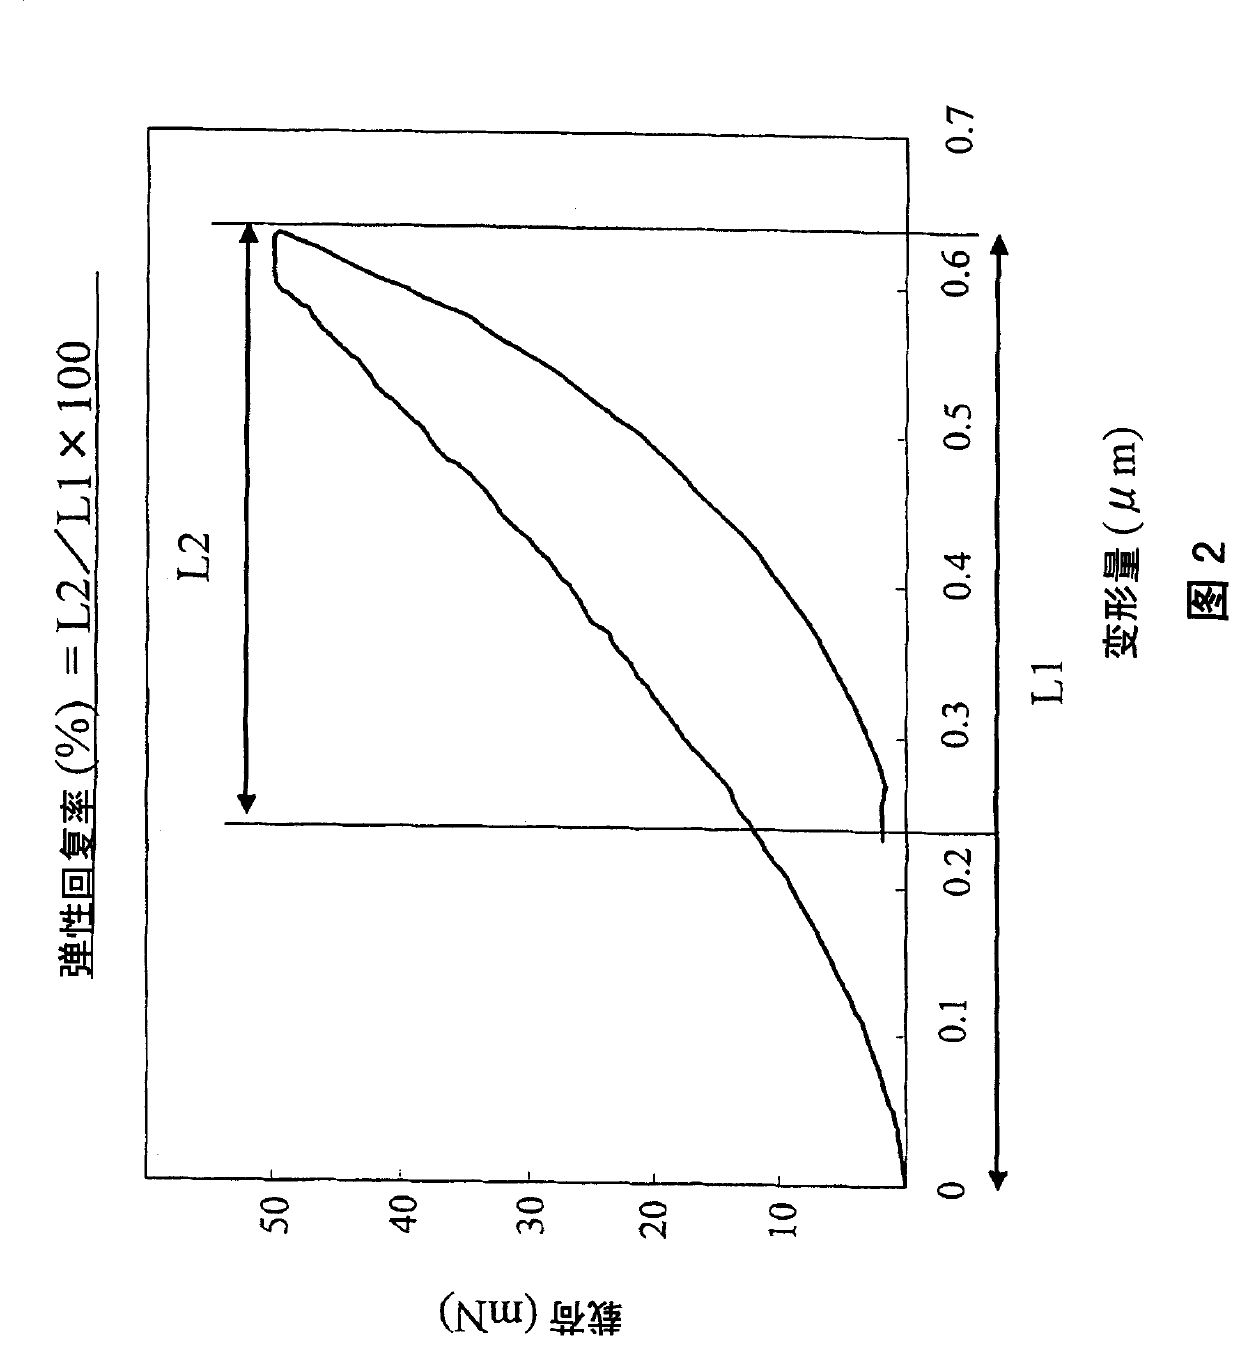 Photosensitive resin composition, protective film and separator of LCD panel, forming method thereof and lcd panel